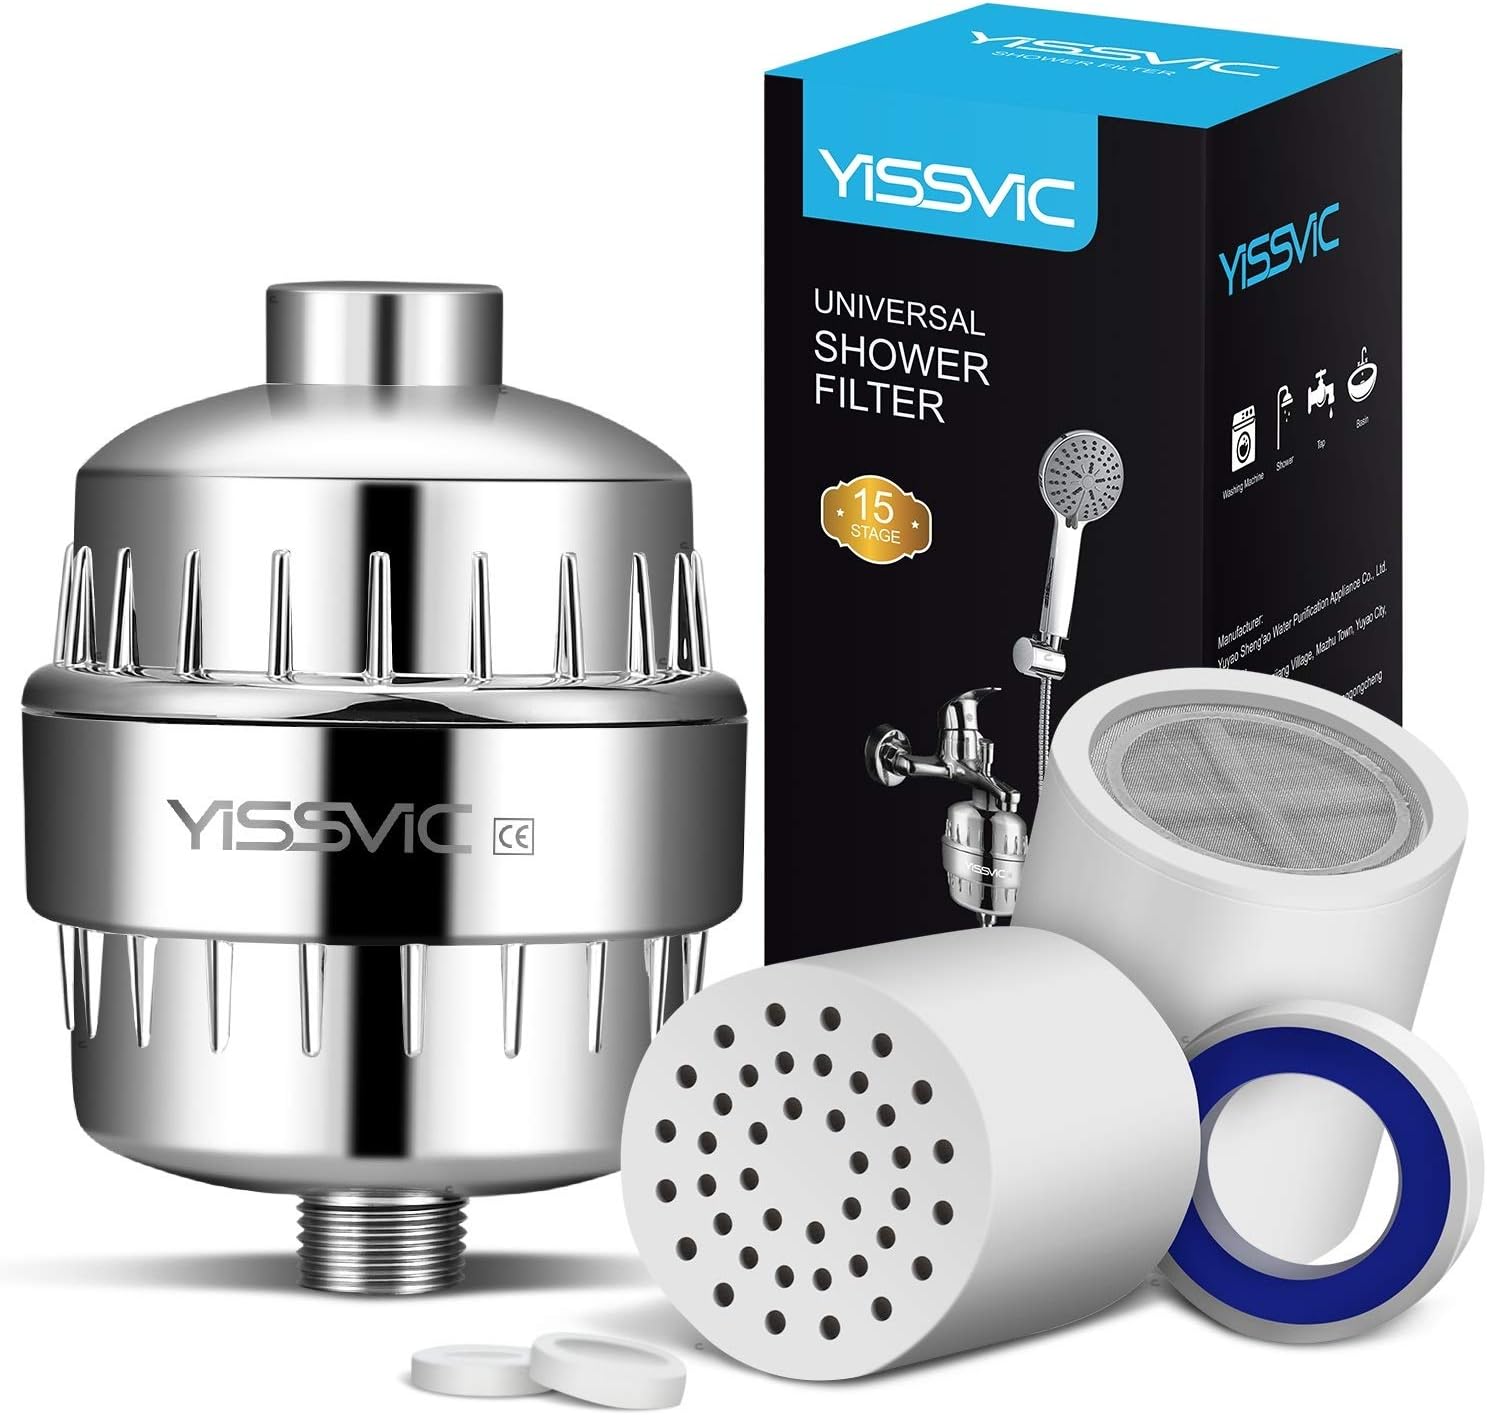 YISSVIC Shower Filter Showerhead Filter 15-Stage Shower Water Filter with 2 Replaceable Cartridges Remove Chlorine Heavy Metal Suitable for Universal Shower Head